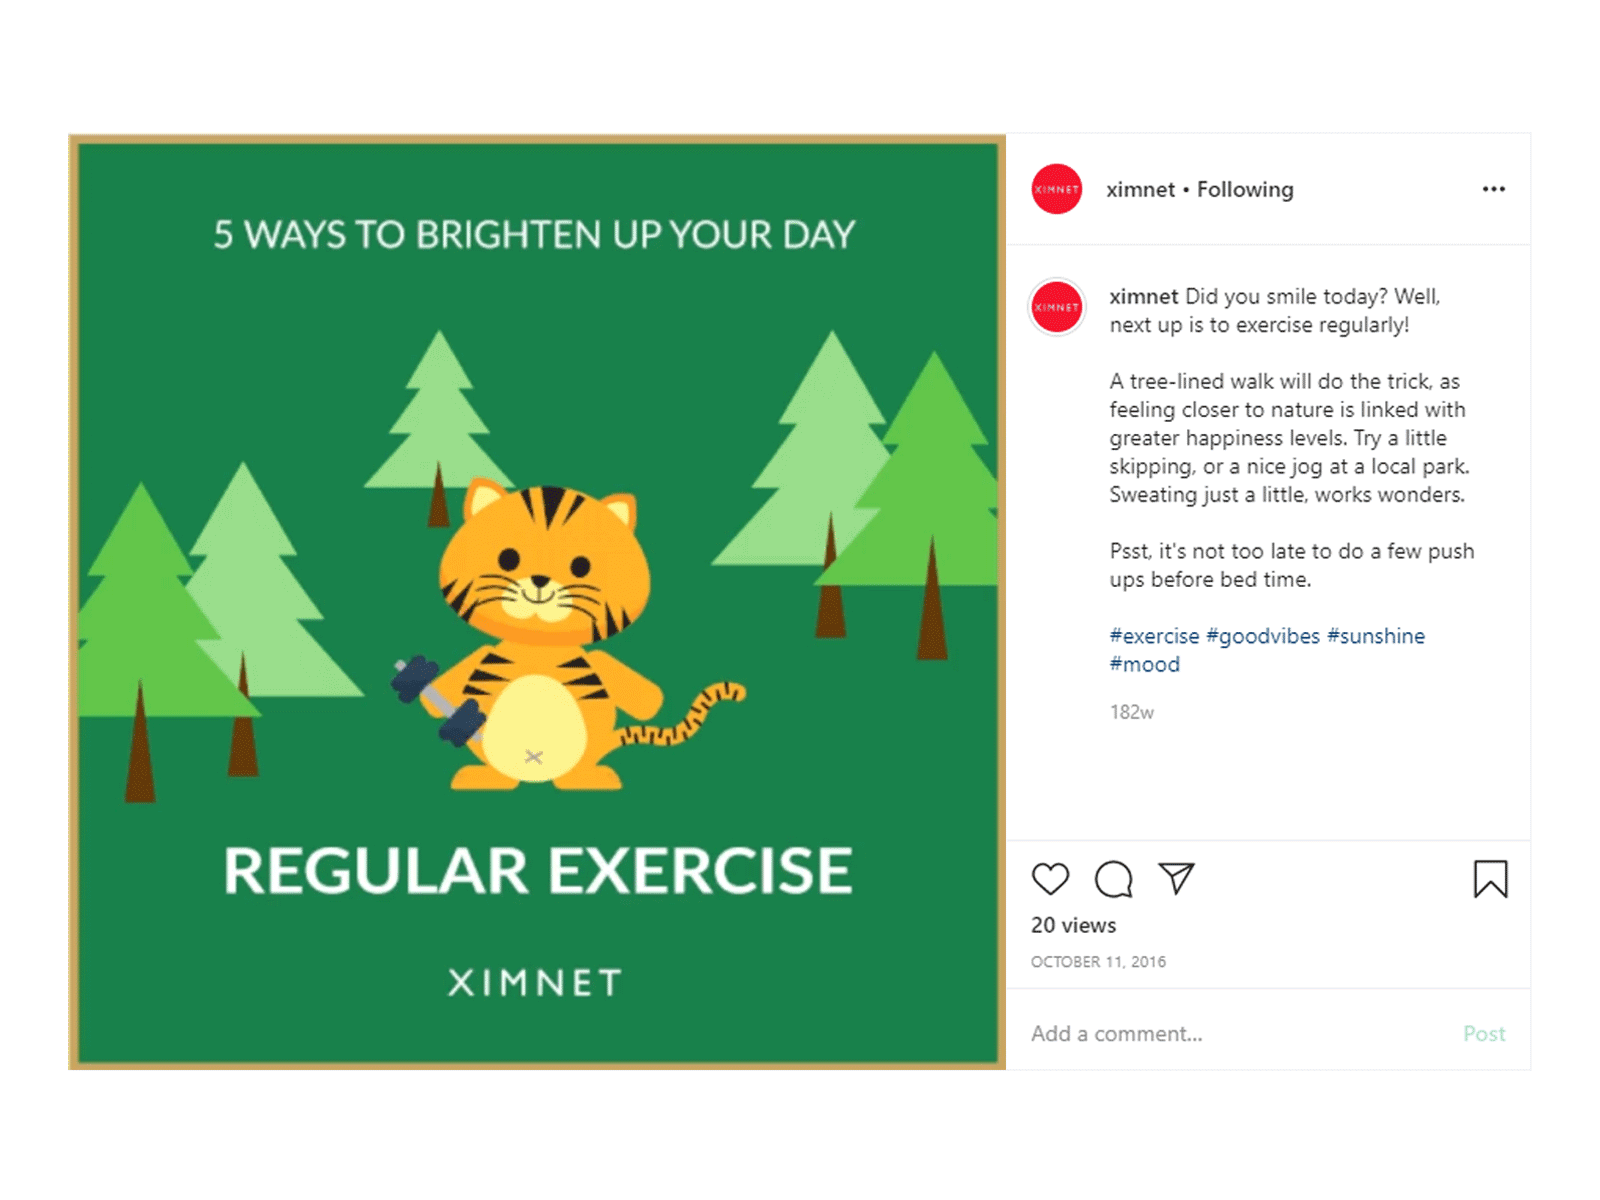 5 Ways To Brighten Up Your Day - Regular Exercise